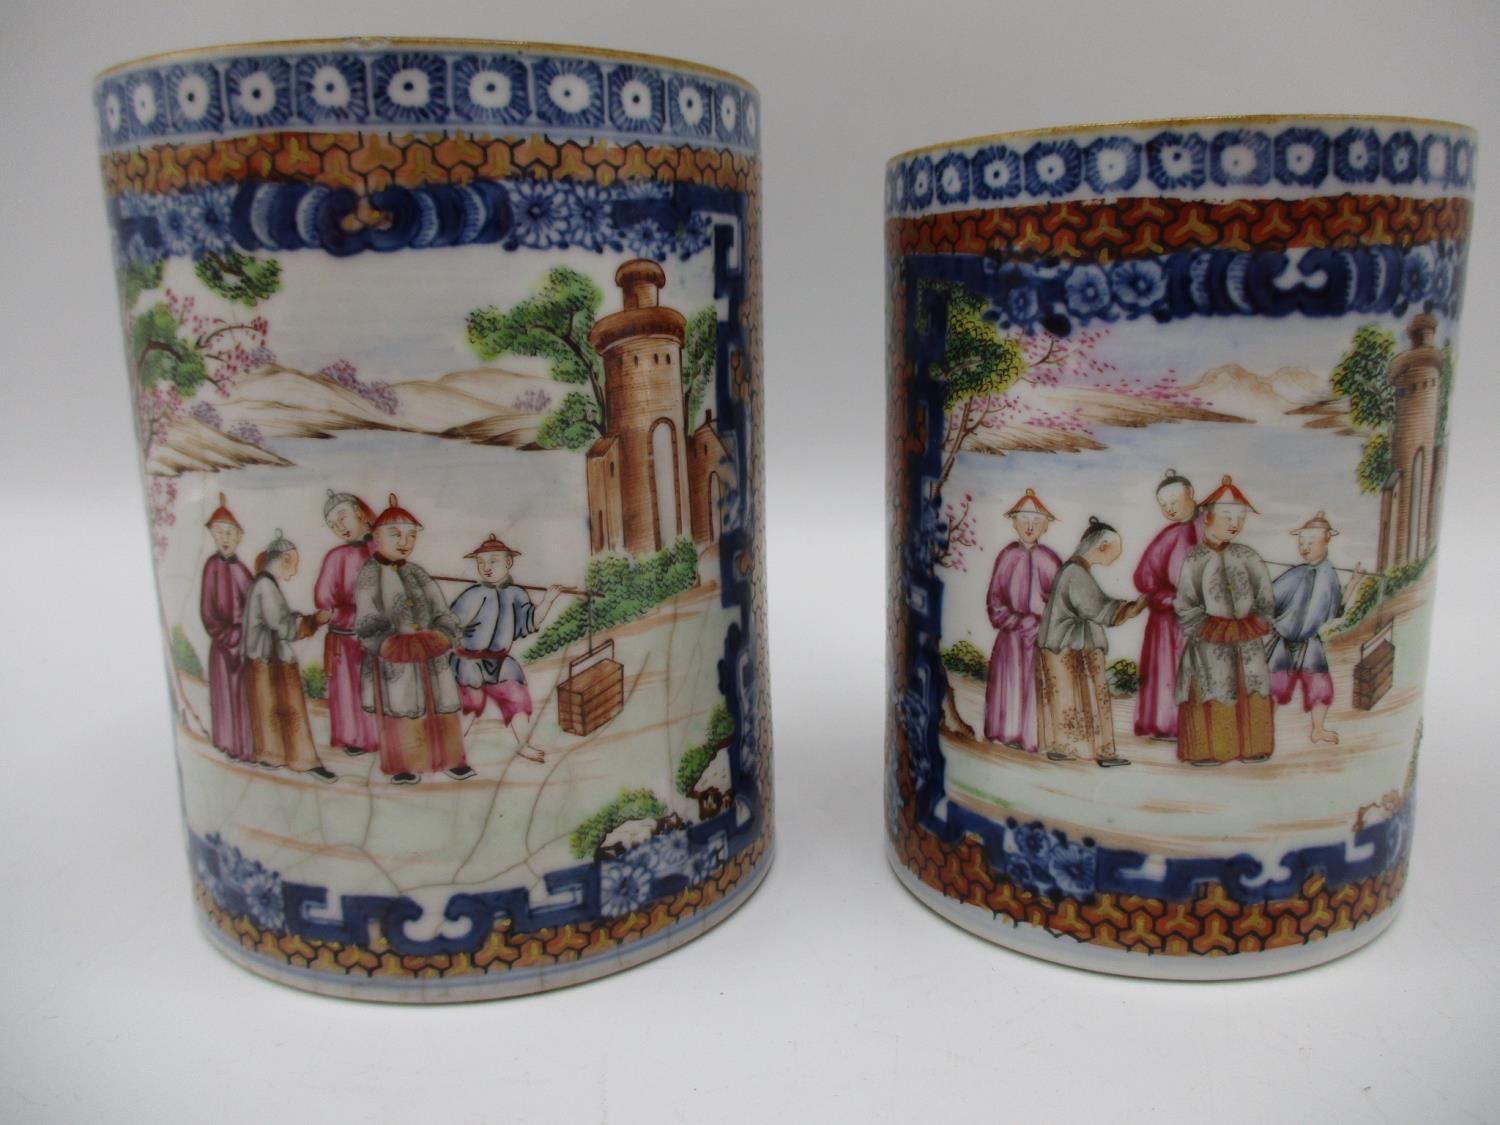 Two similar late 18th century Chinese Qing Dynasty export tankards, decorated with a panel of - Image 2 of 6